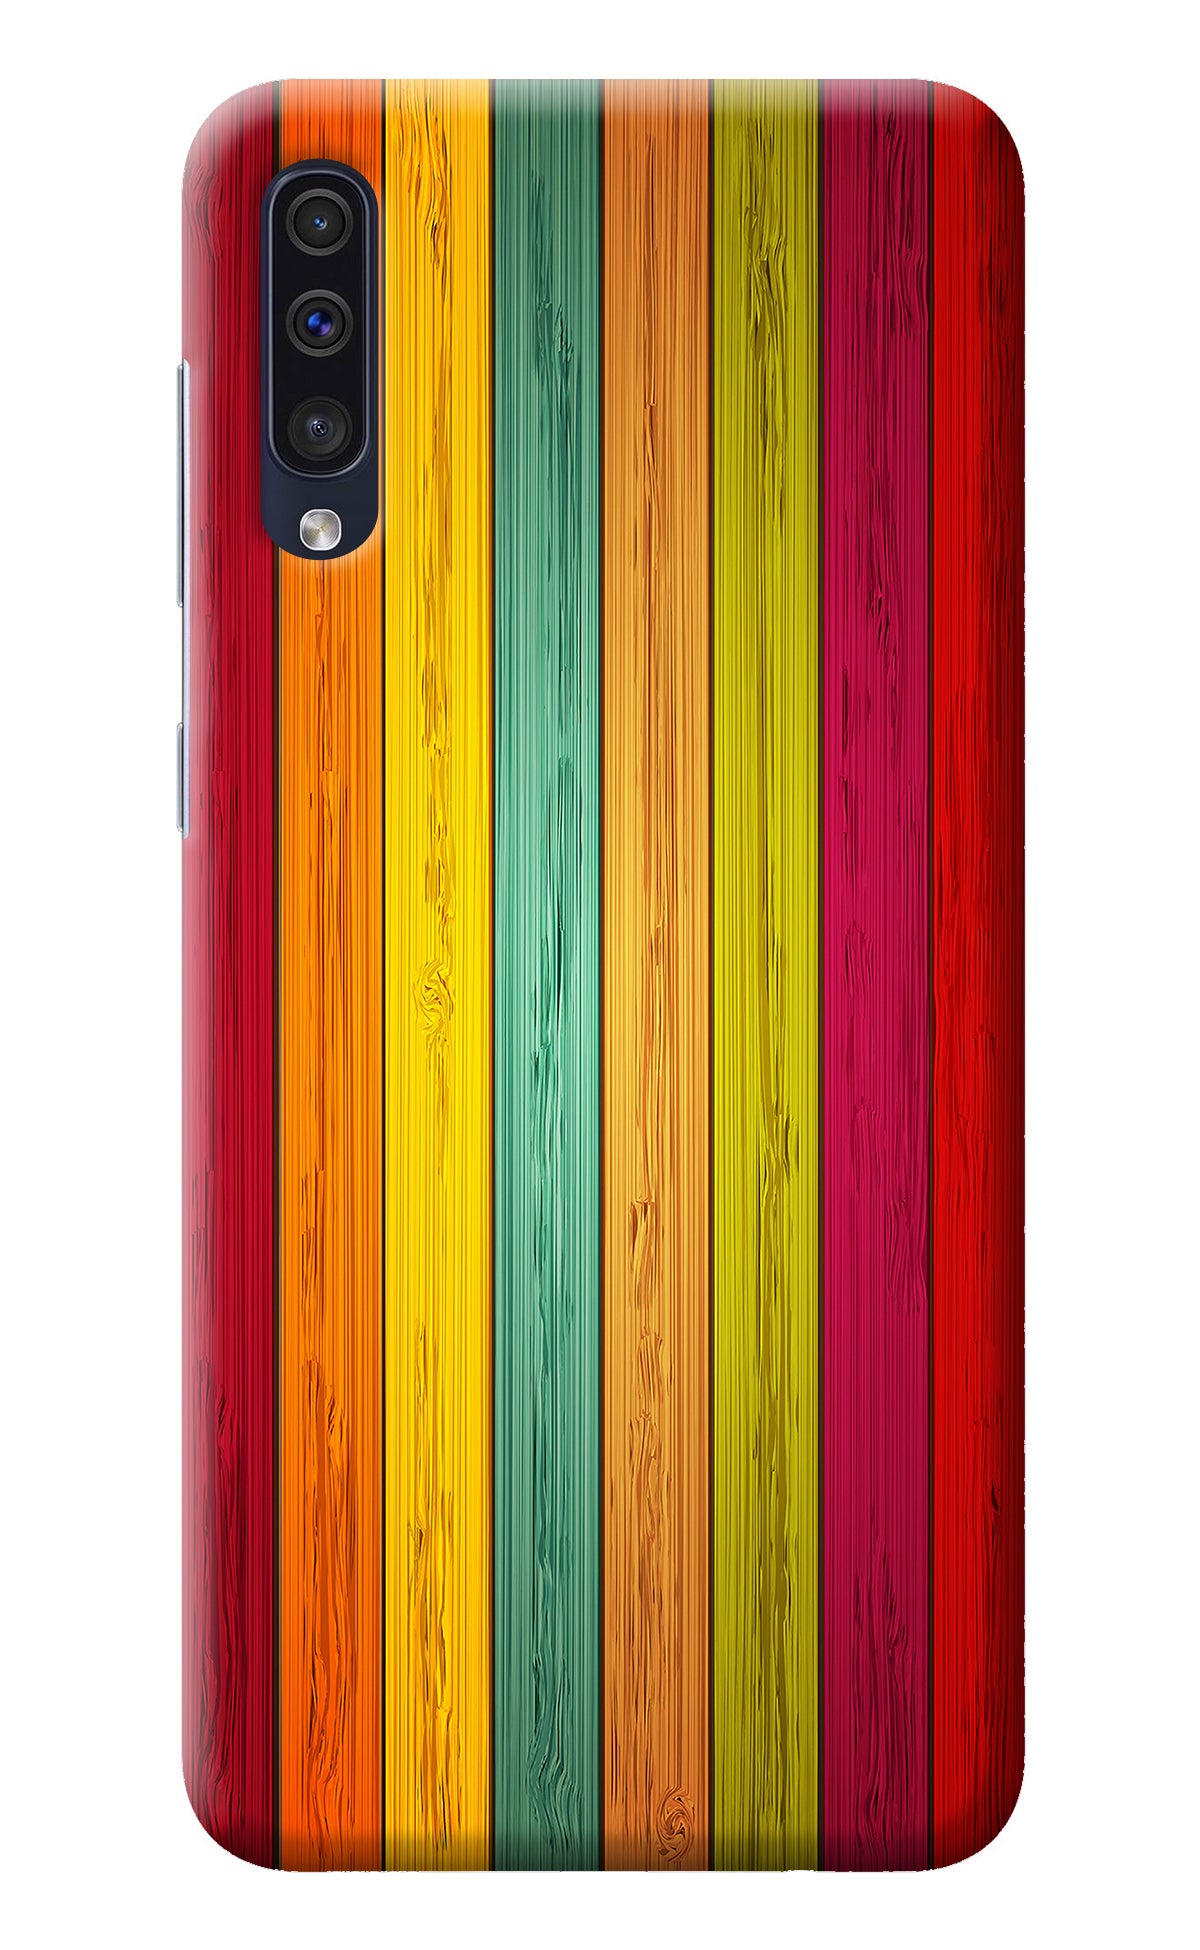 Multicolor Wooden Samsung A50/A50s/A30s Back Cover